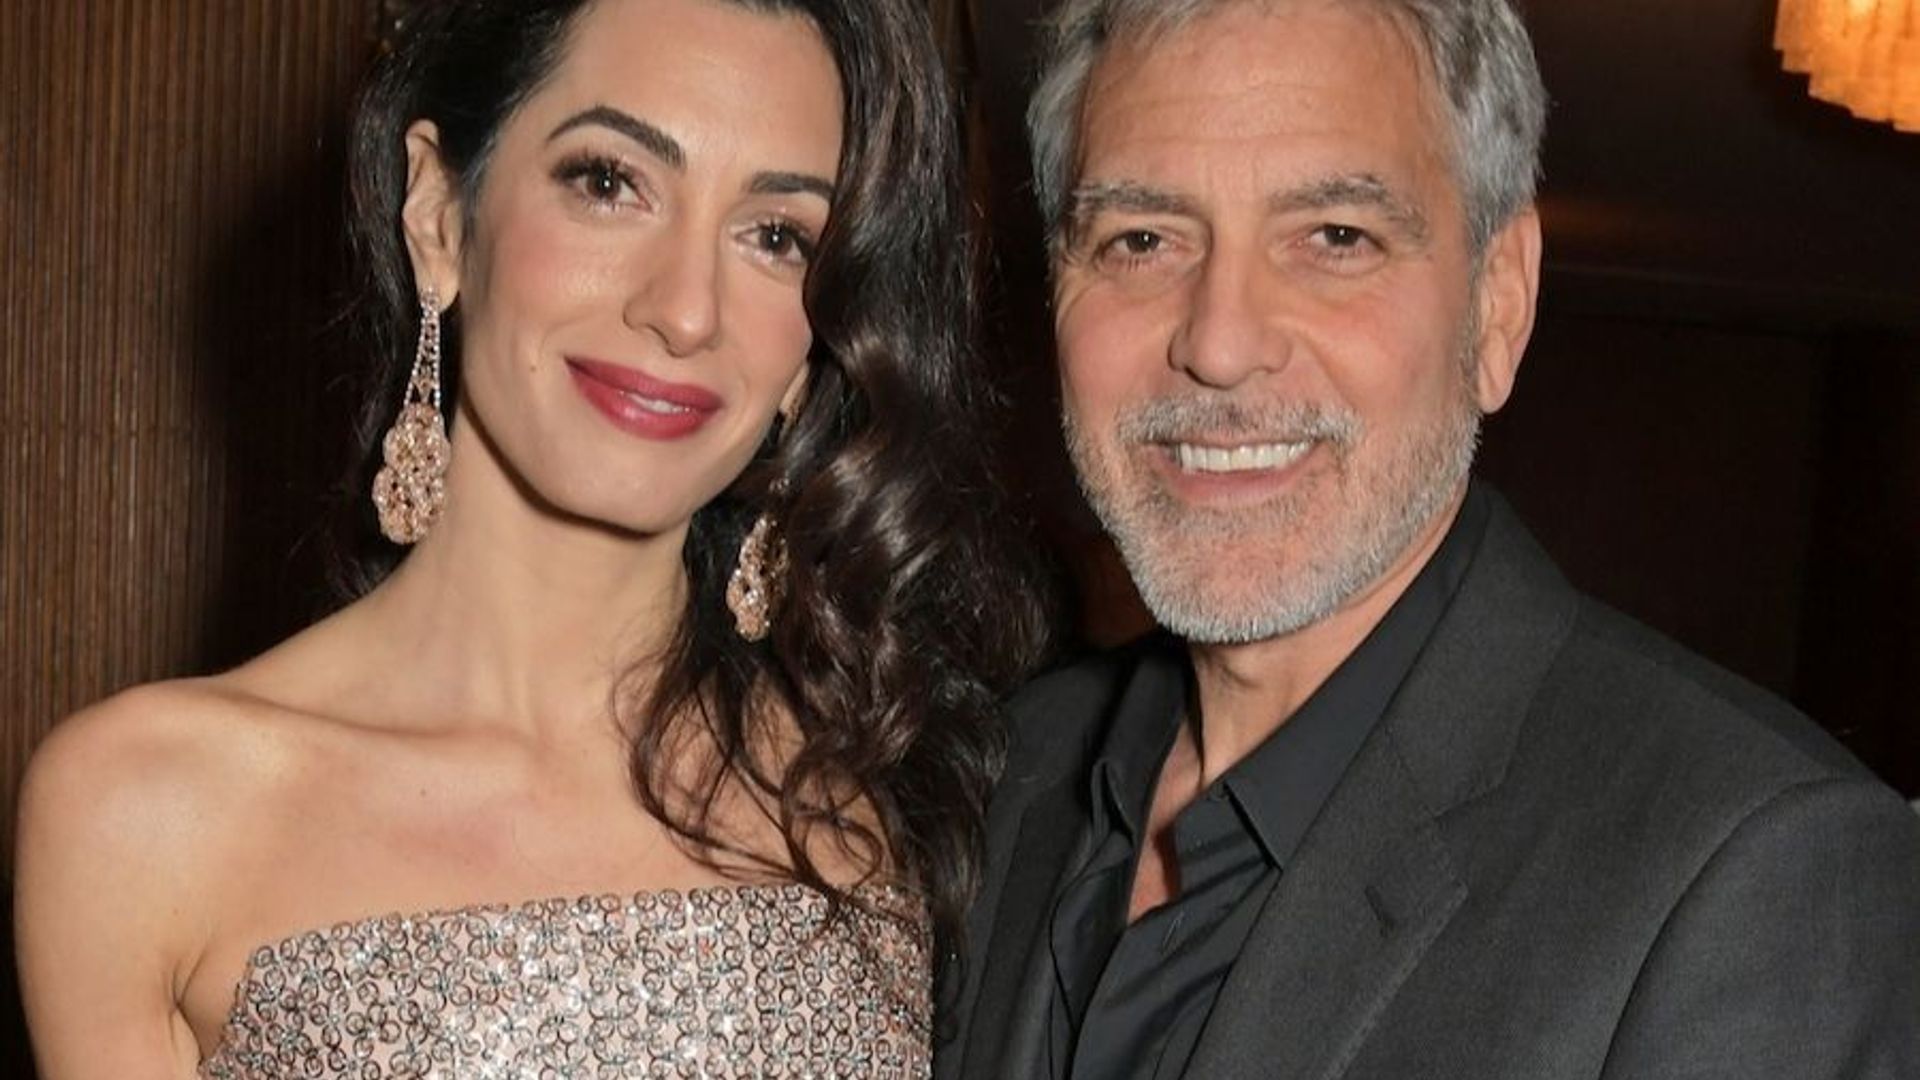 'I'll write a letter and slip it on her desk': George Clooney writes love letters to wife Amal in COVID-19 lockdown